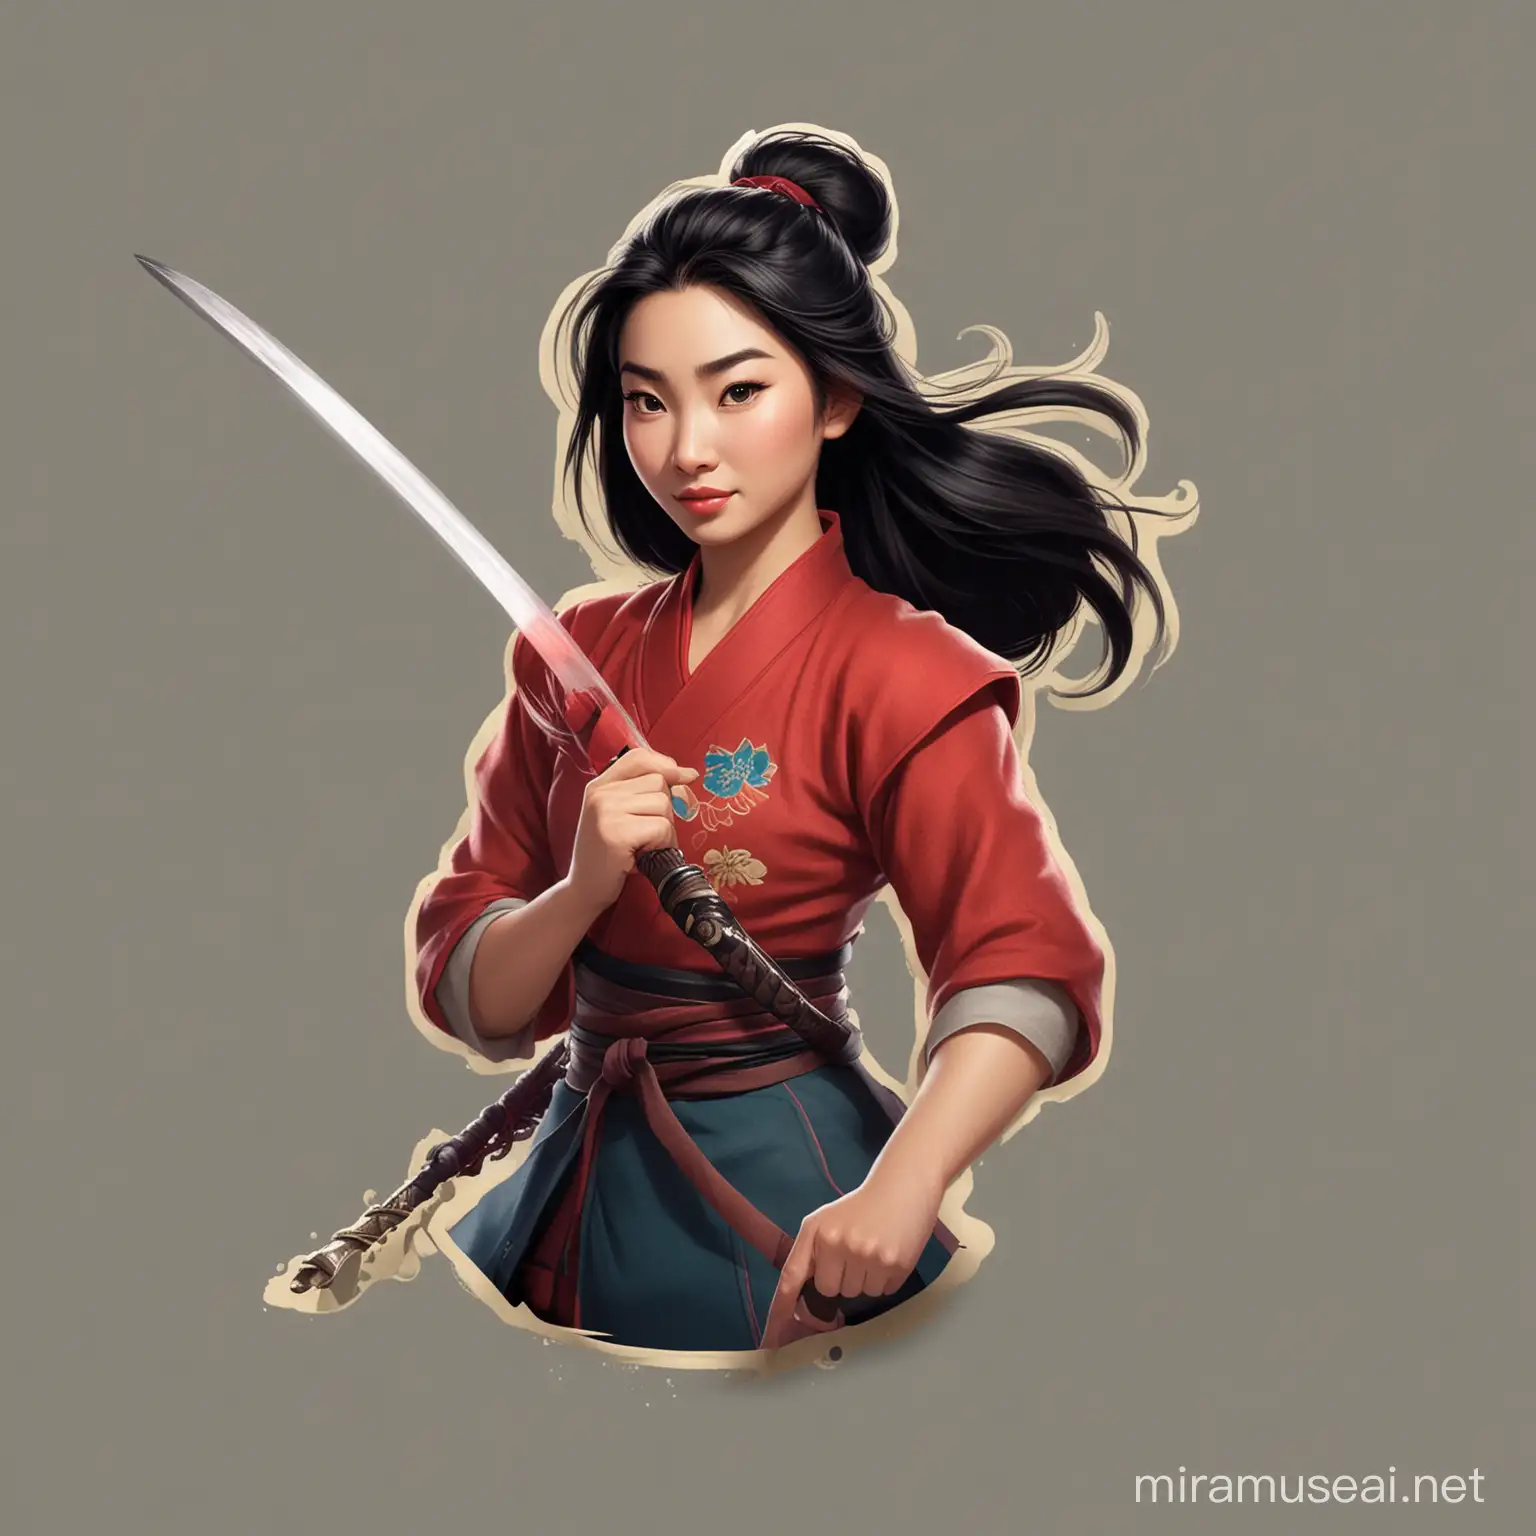 Mulan in Warrior Outfit with Sword